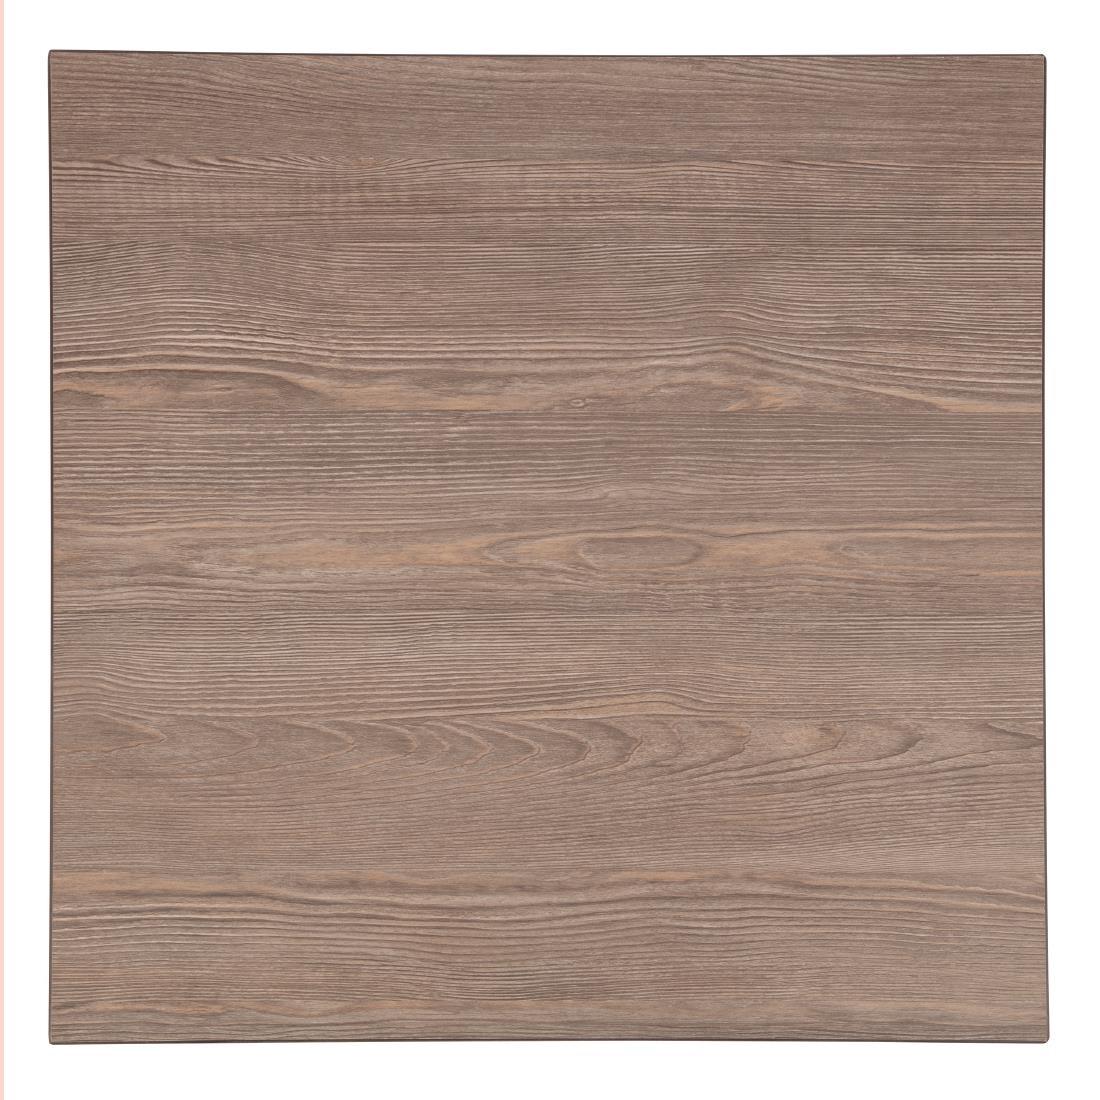 Bolero Pre-drilled Square Table Top Vintage Wood 600mm - GR323  - 1